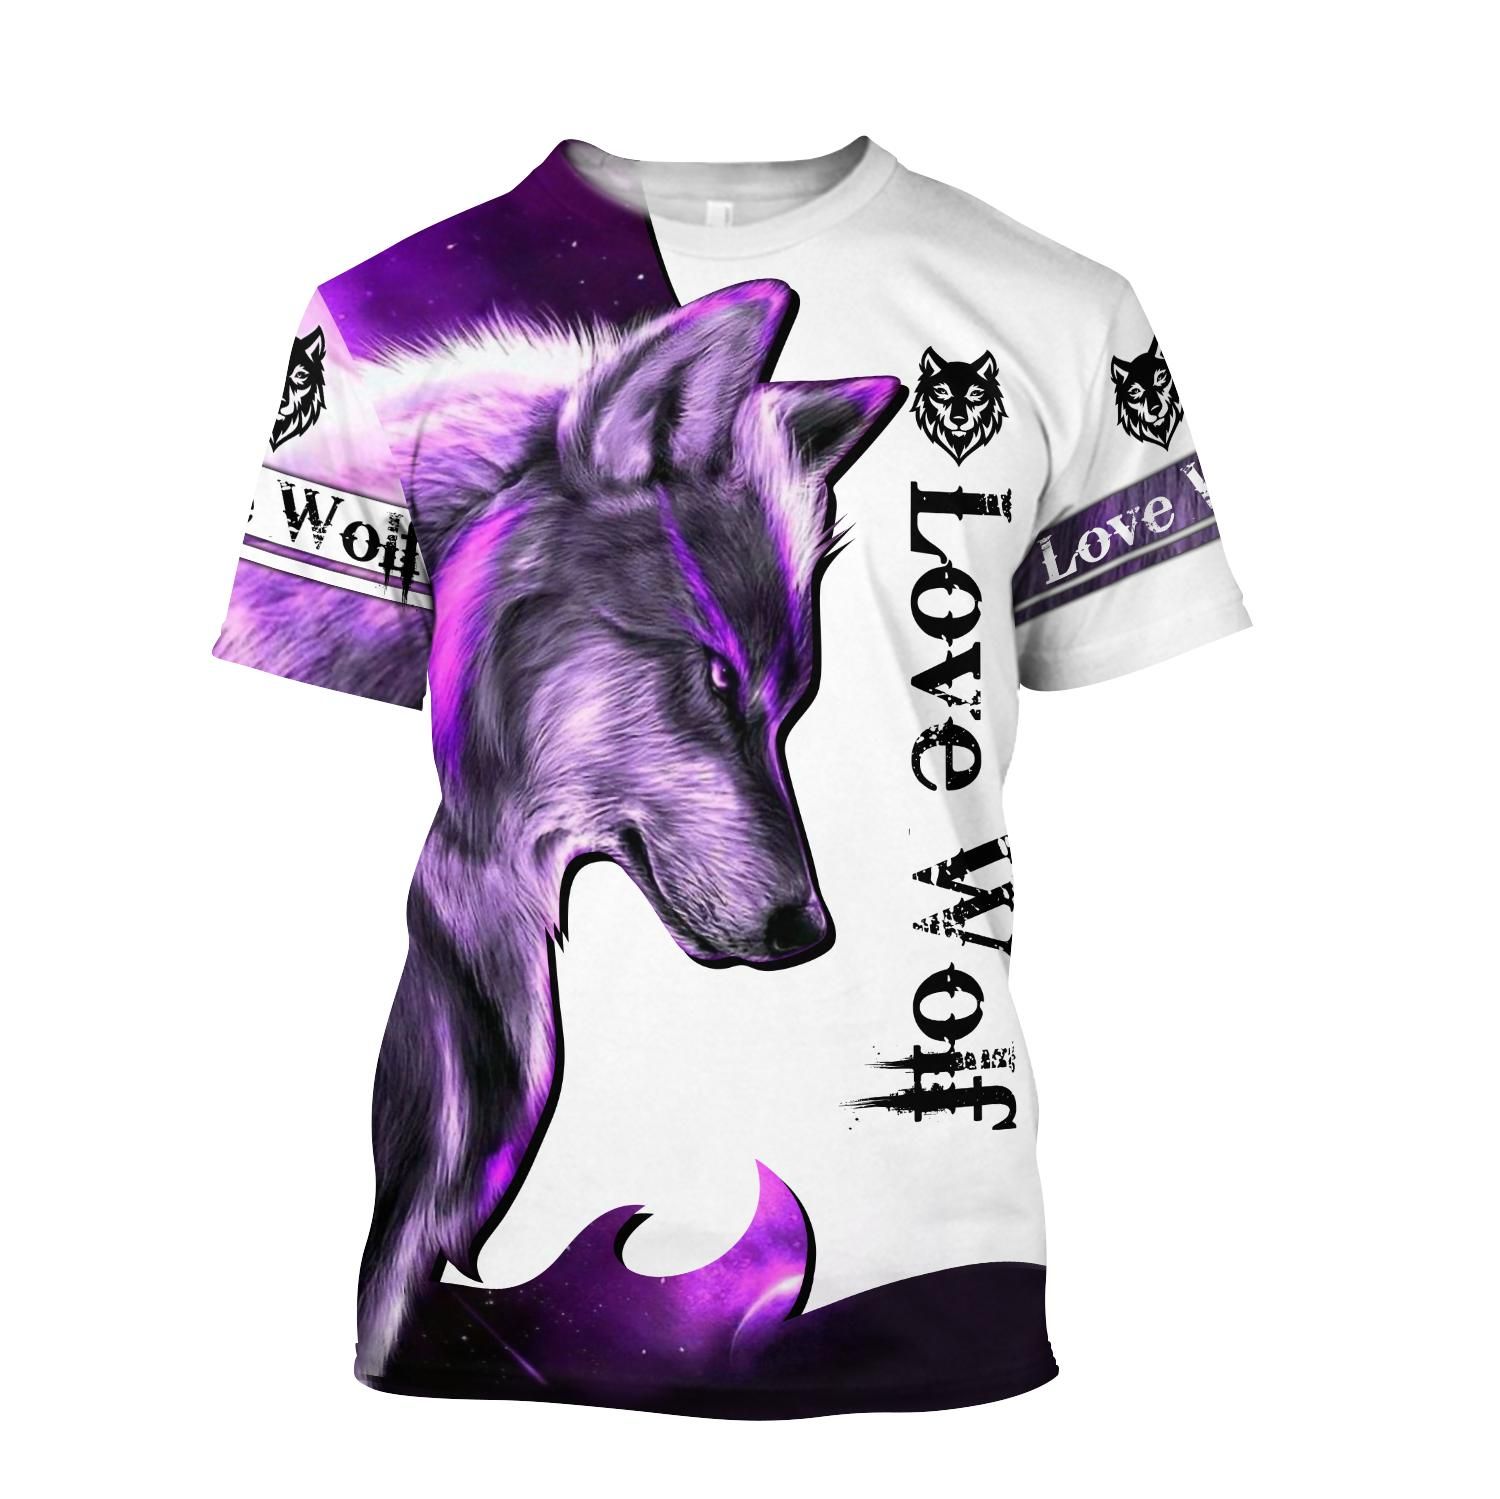 Purple Wolf 3D All Over Printed T-Shirt by SUN QB05282005-SU